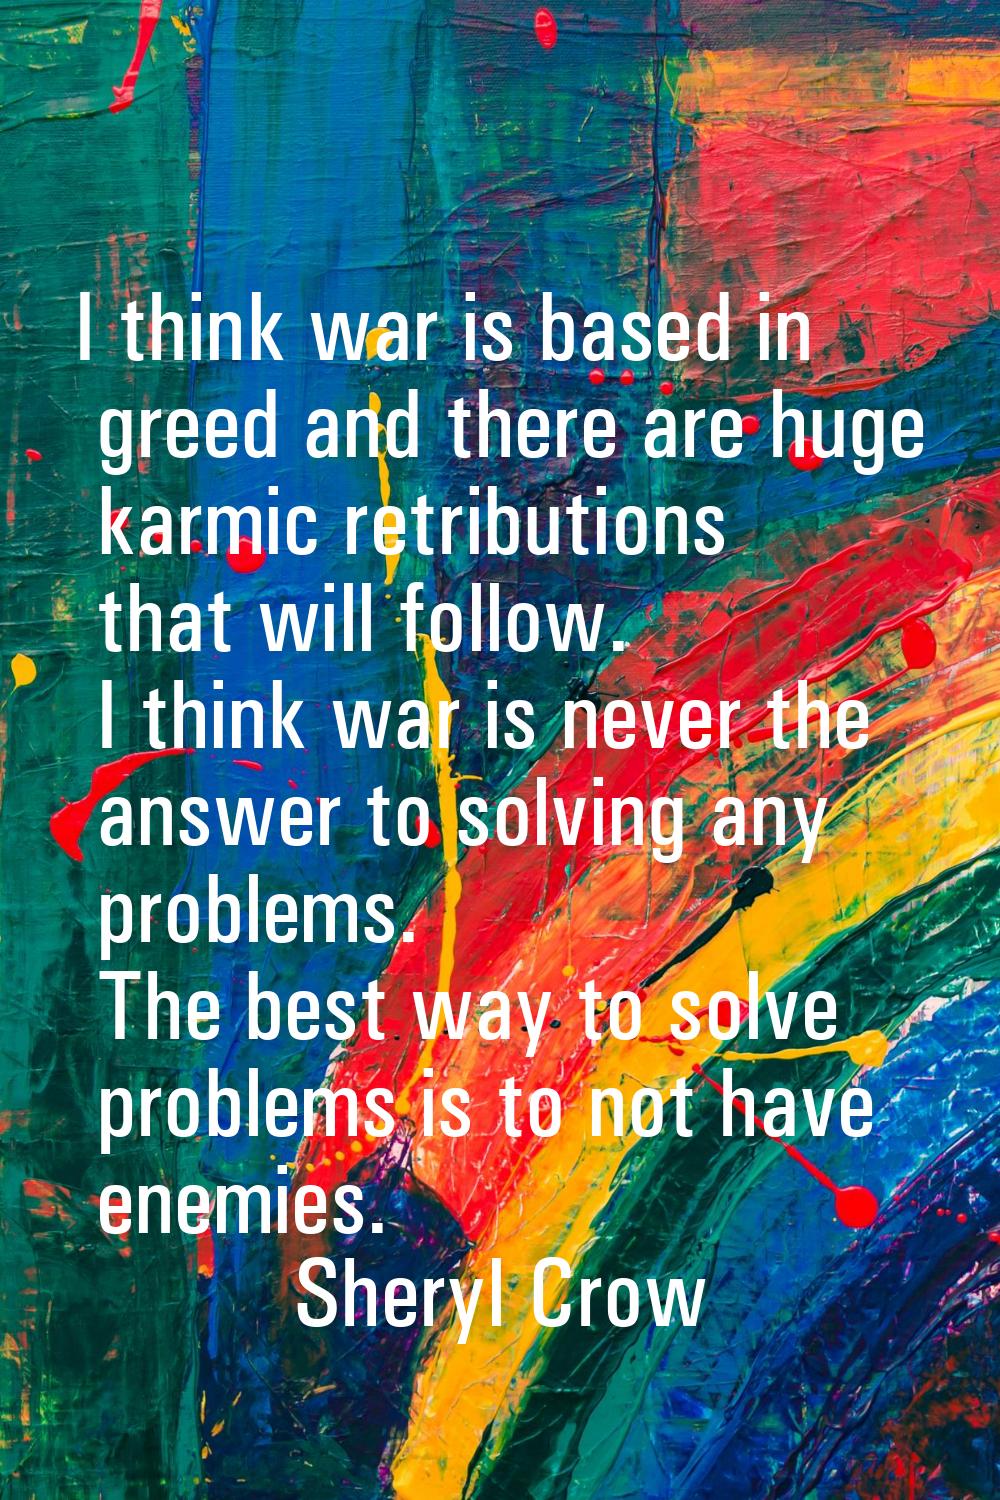 I think war is based in greed and there are huge karmic retributions that will follow. I think war 